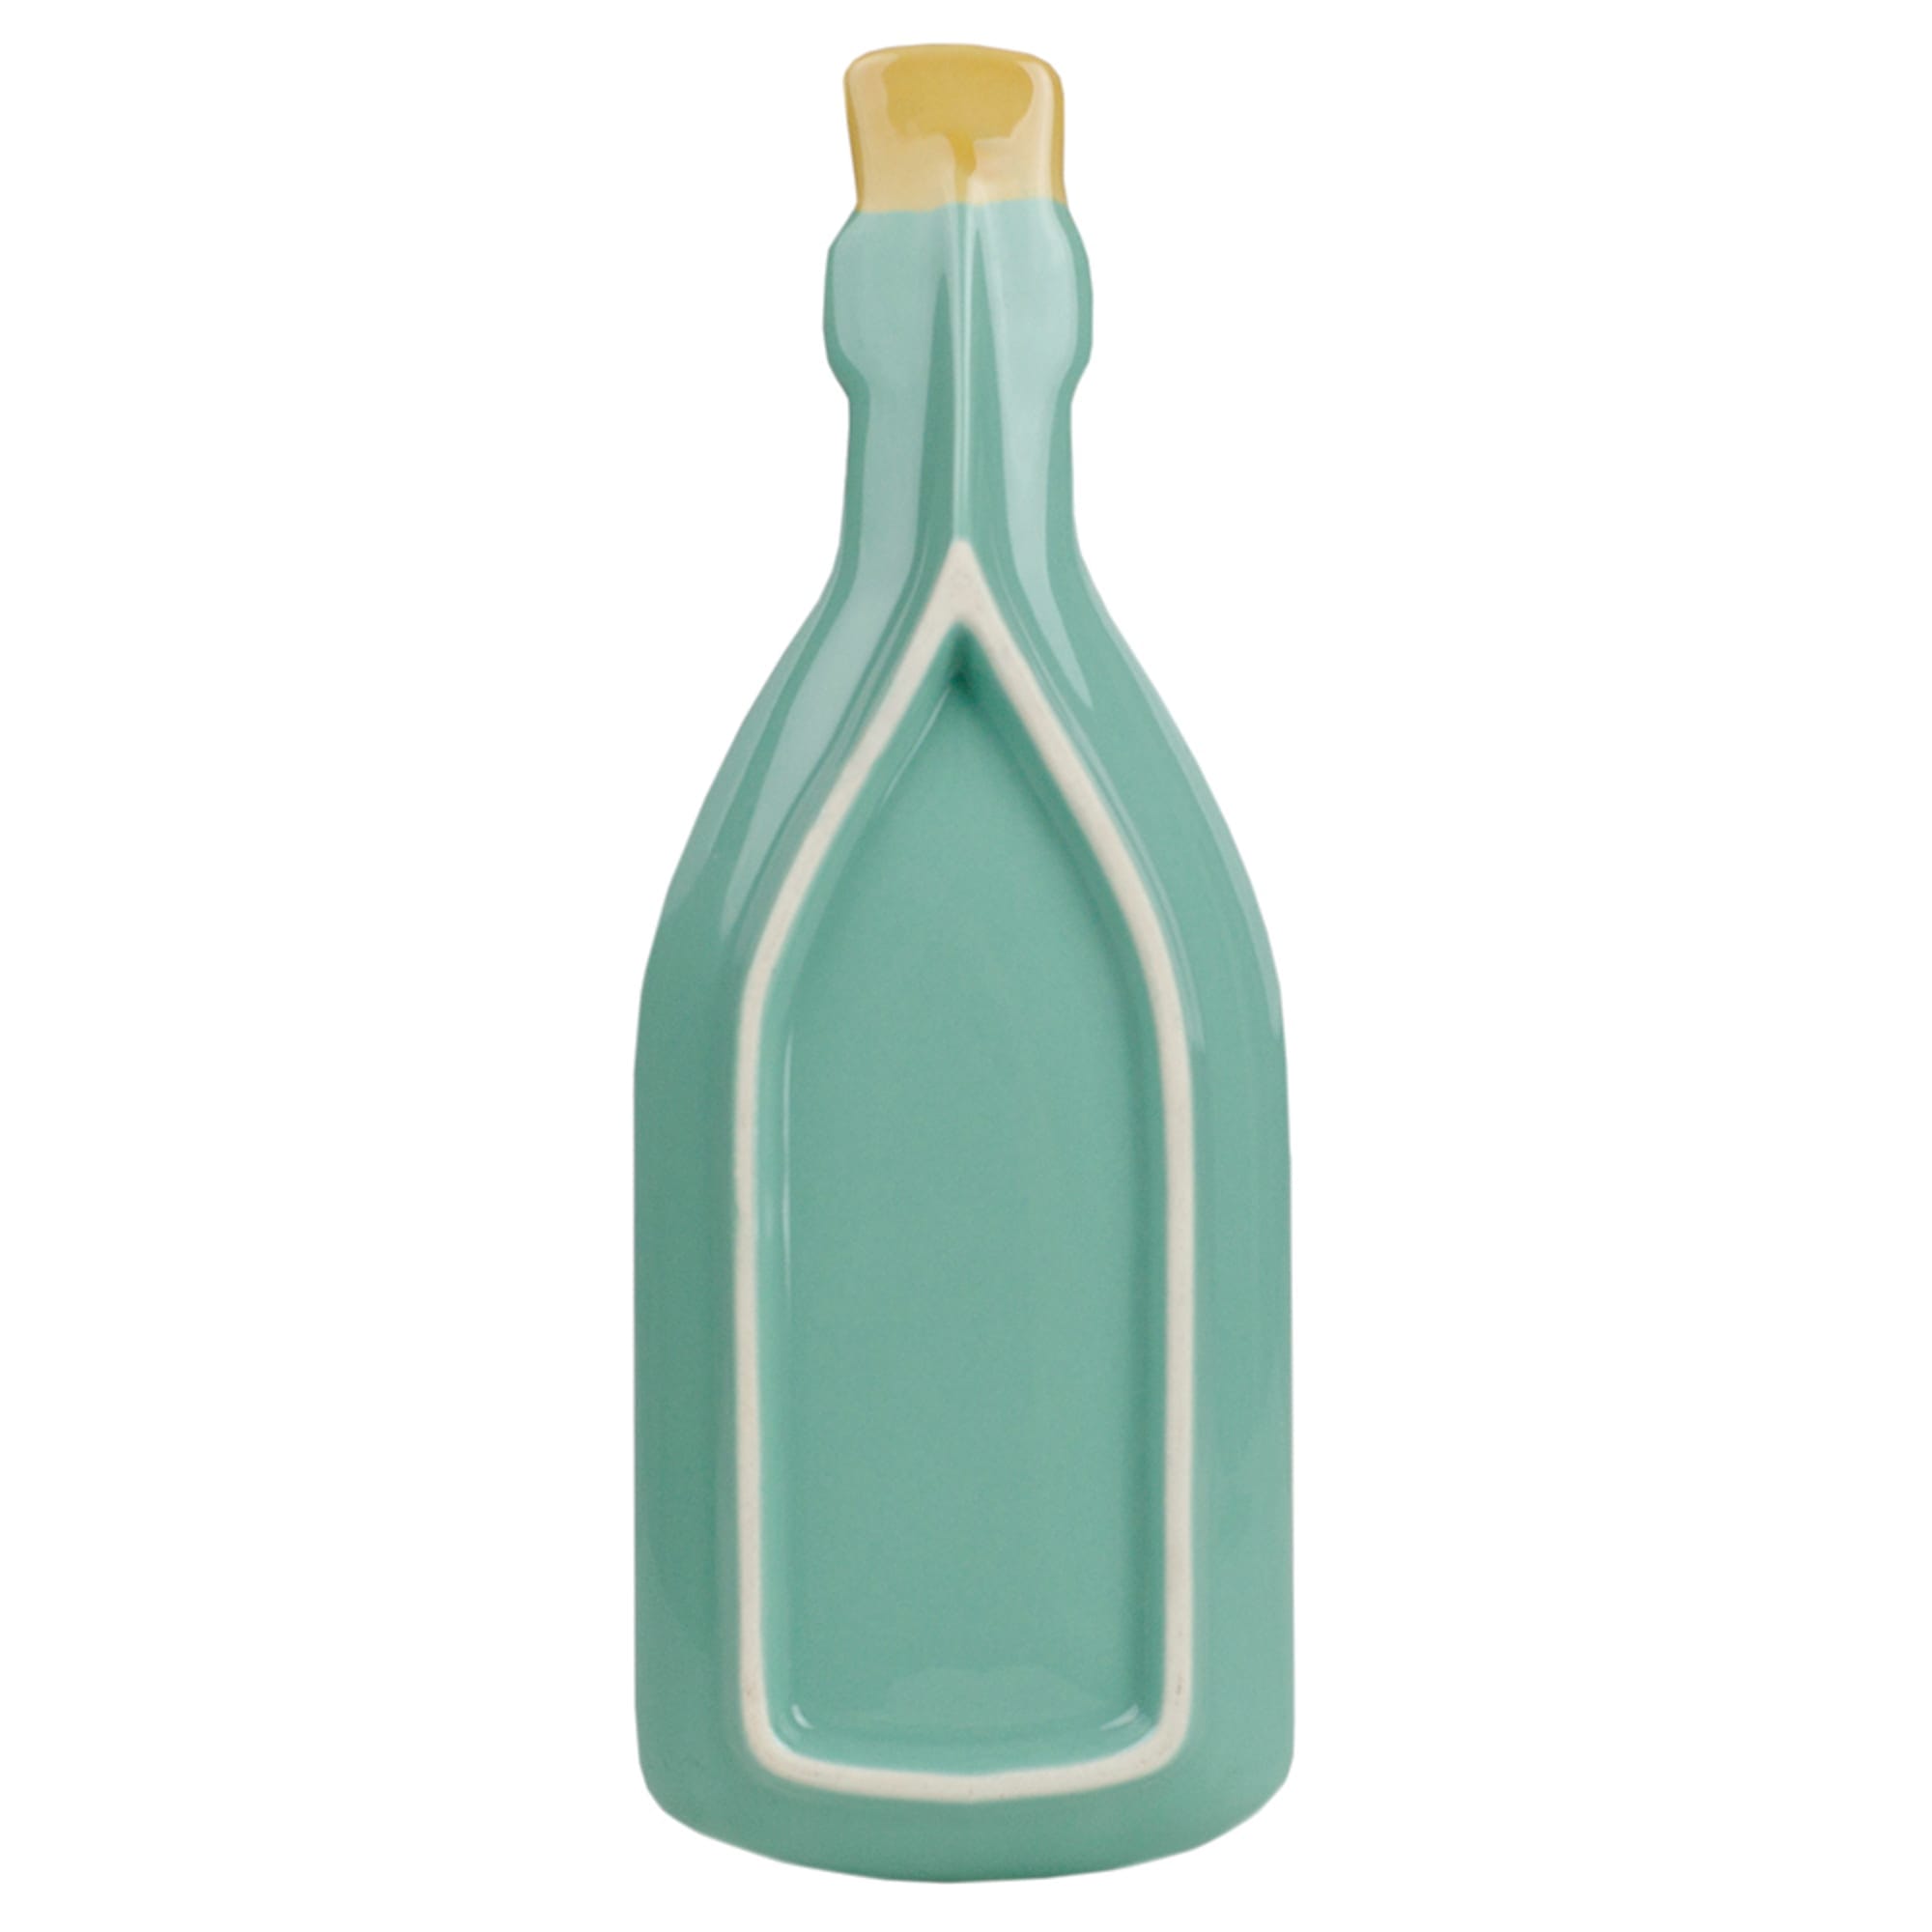 Home Basics Dinner is Poured Wine Shape Ceramic Spoon Rest, Teal $4.00 EACH, CASE PACK OF 24